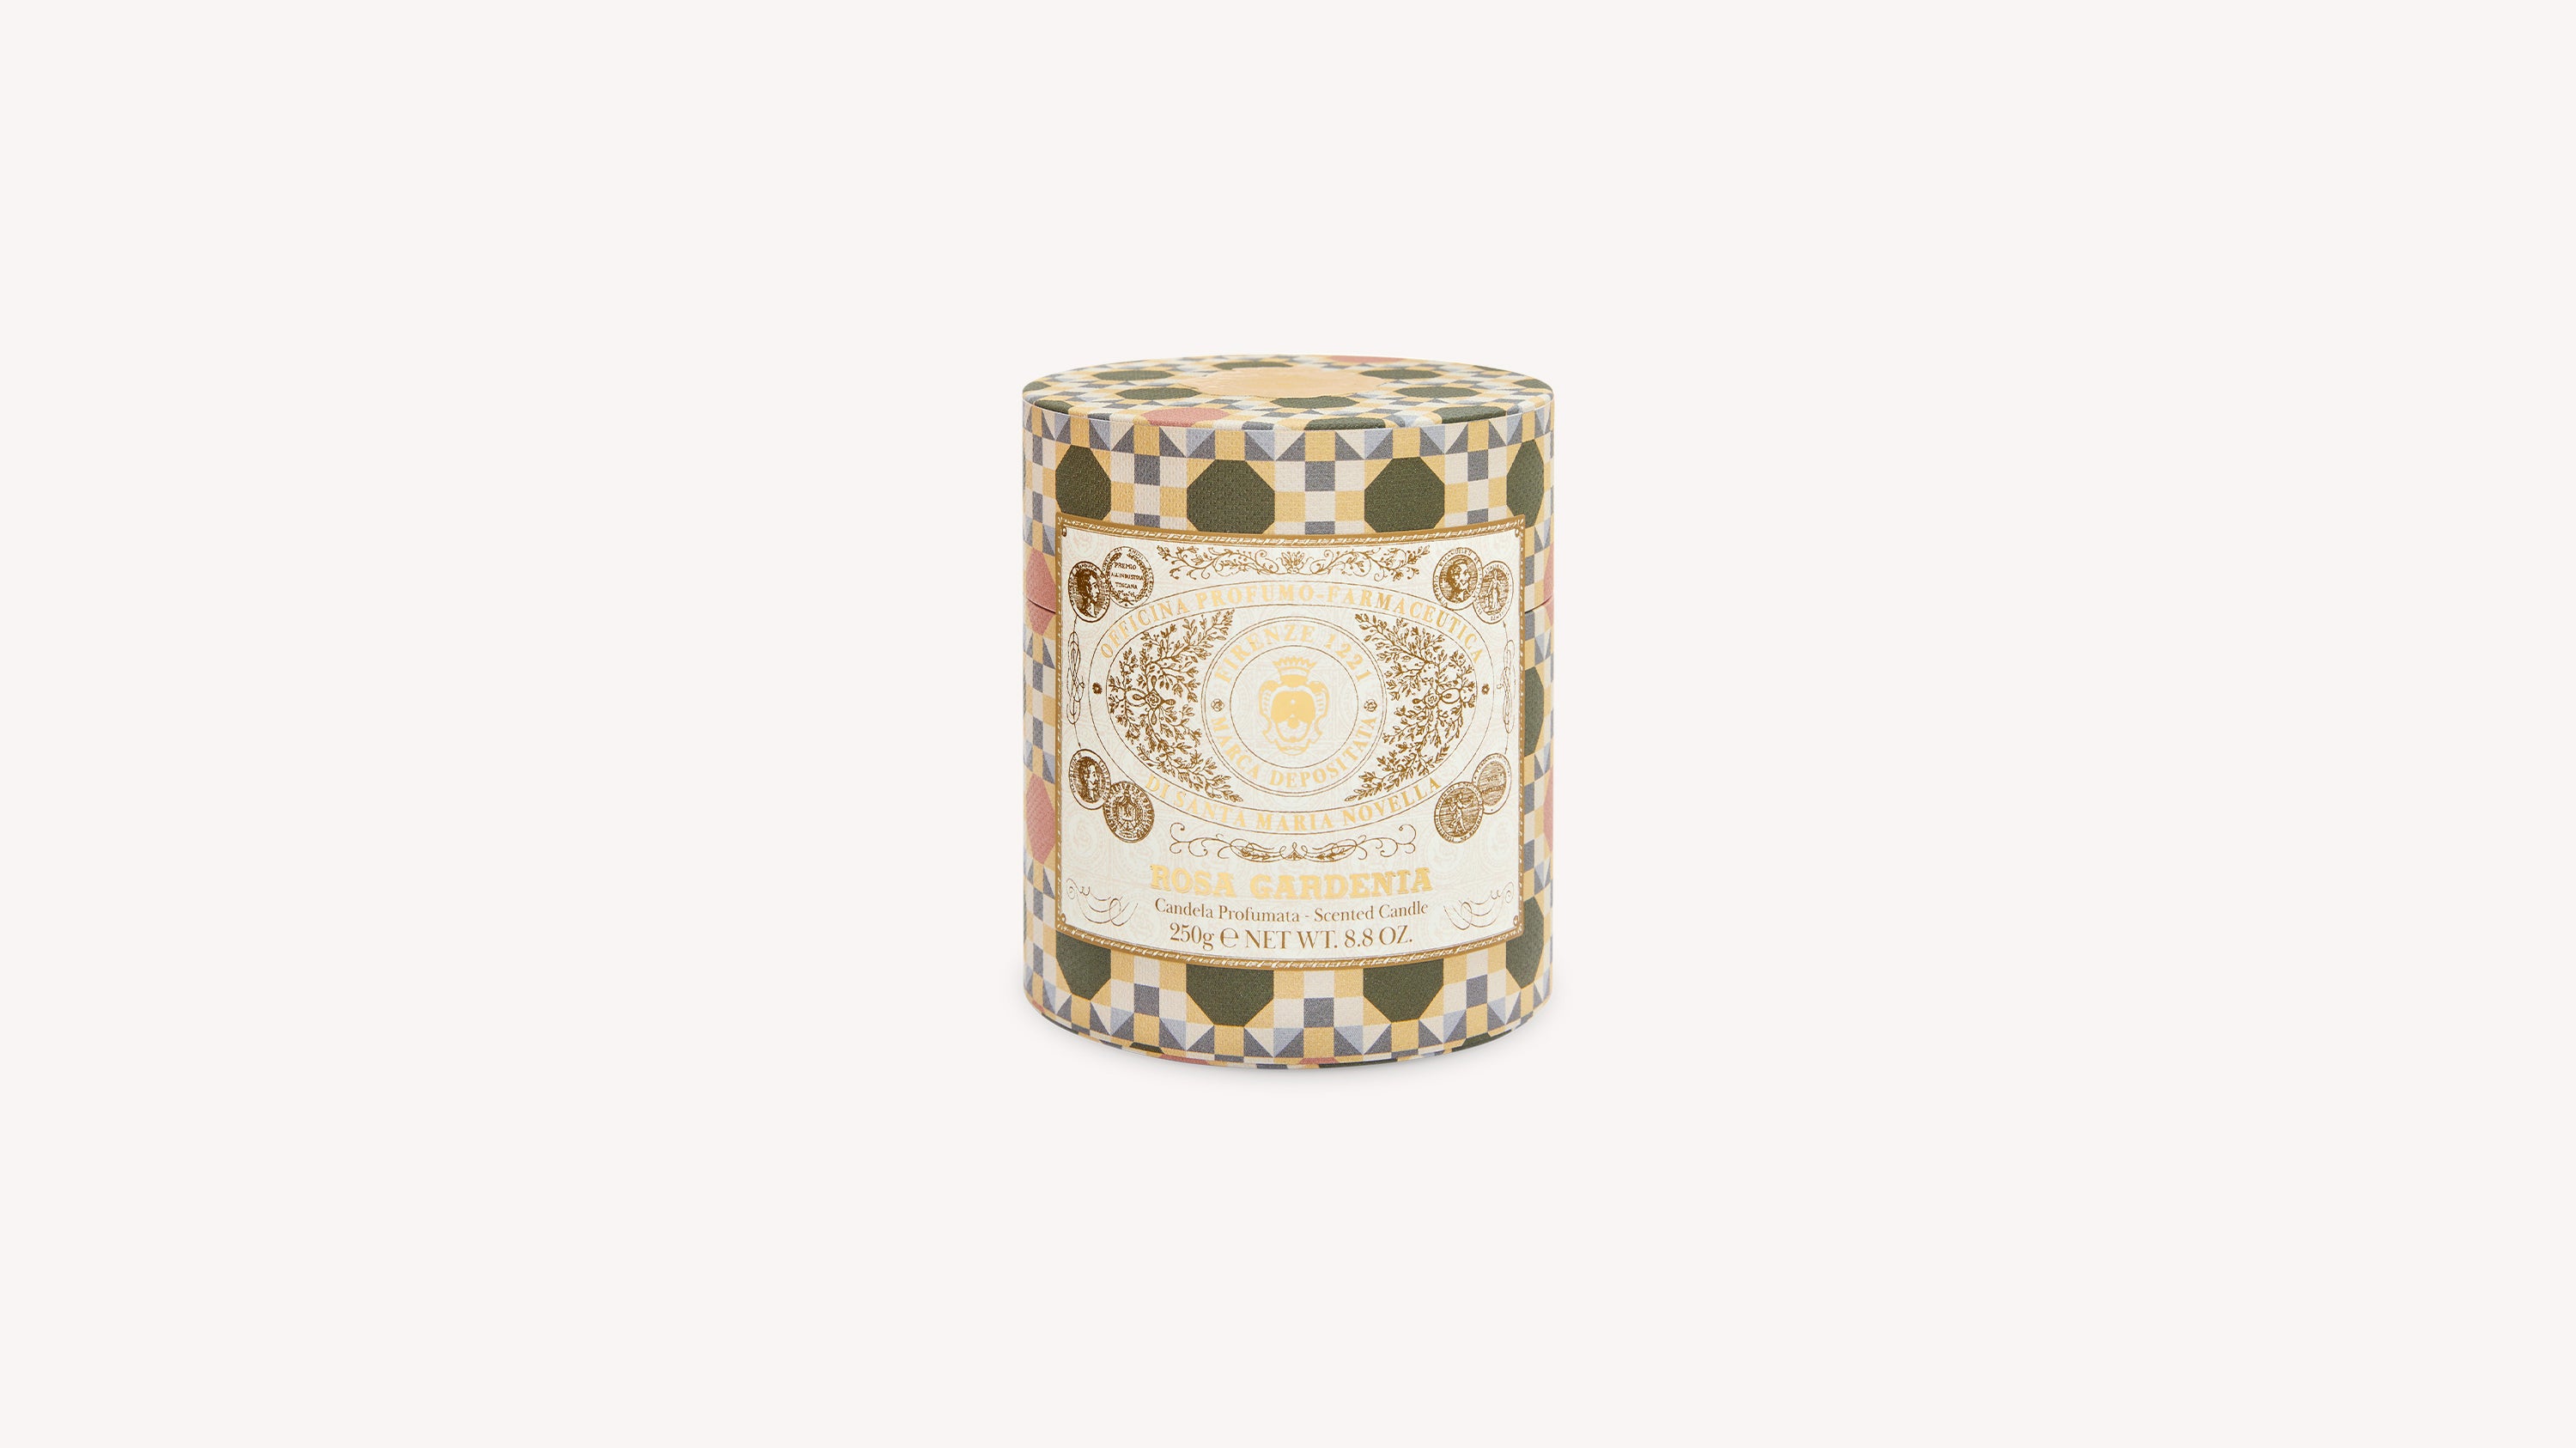 Rosa Gardenia Scented Candle